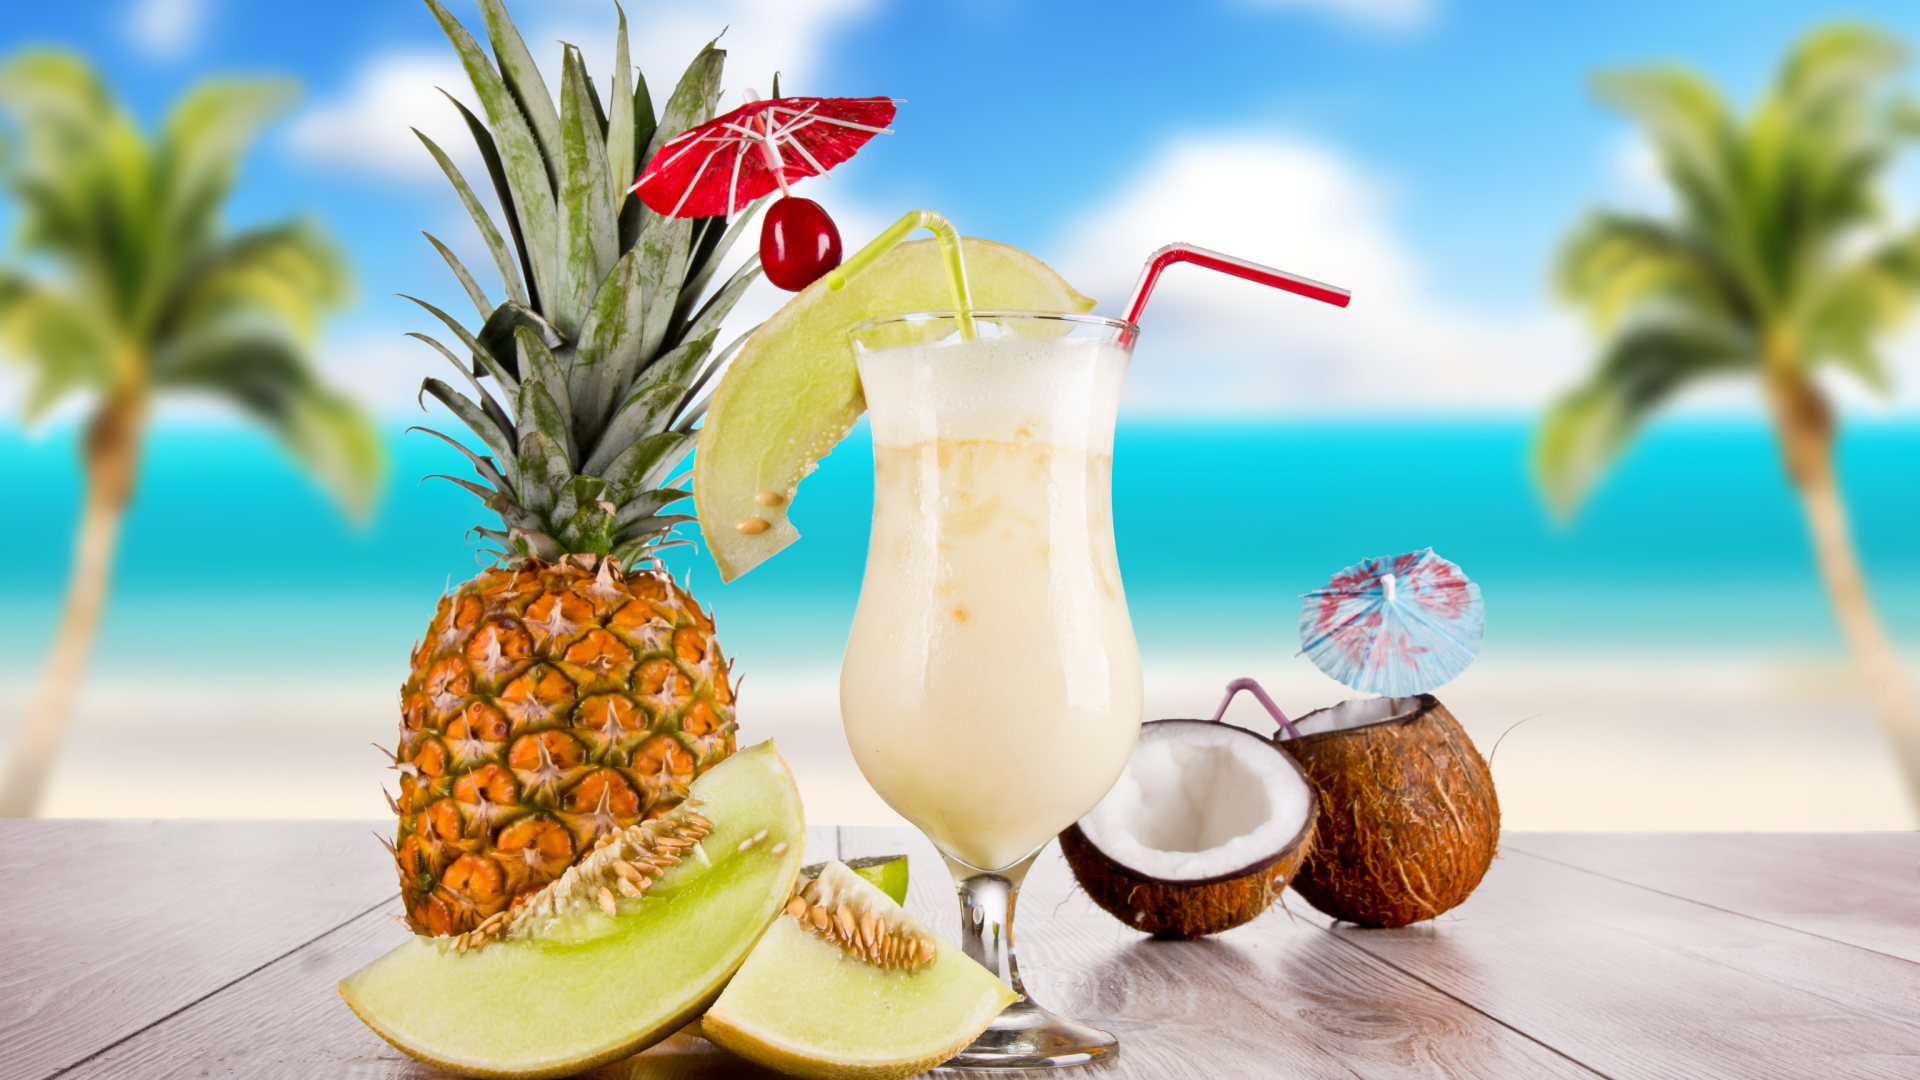 Das Coconut and Pineapple Cocktails Wallpaper 1920x1080